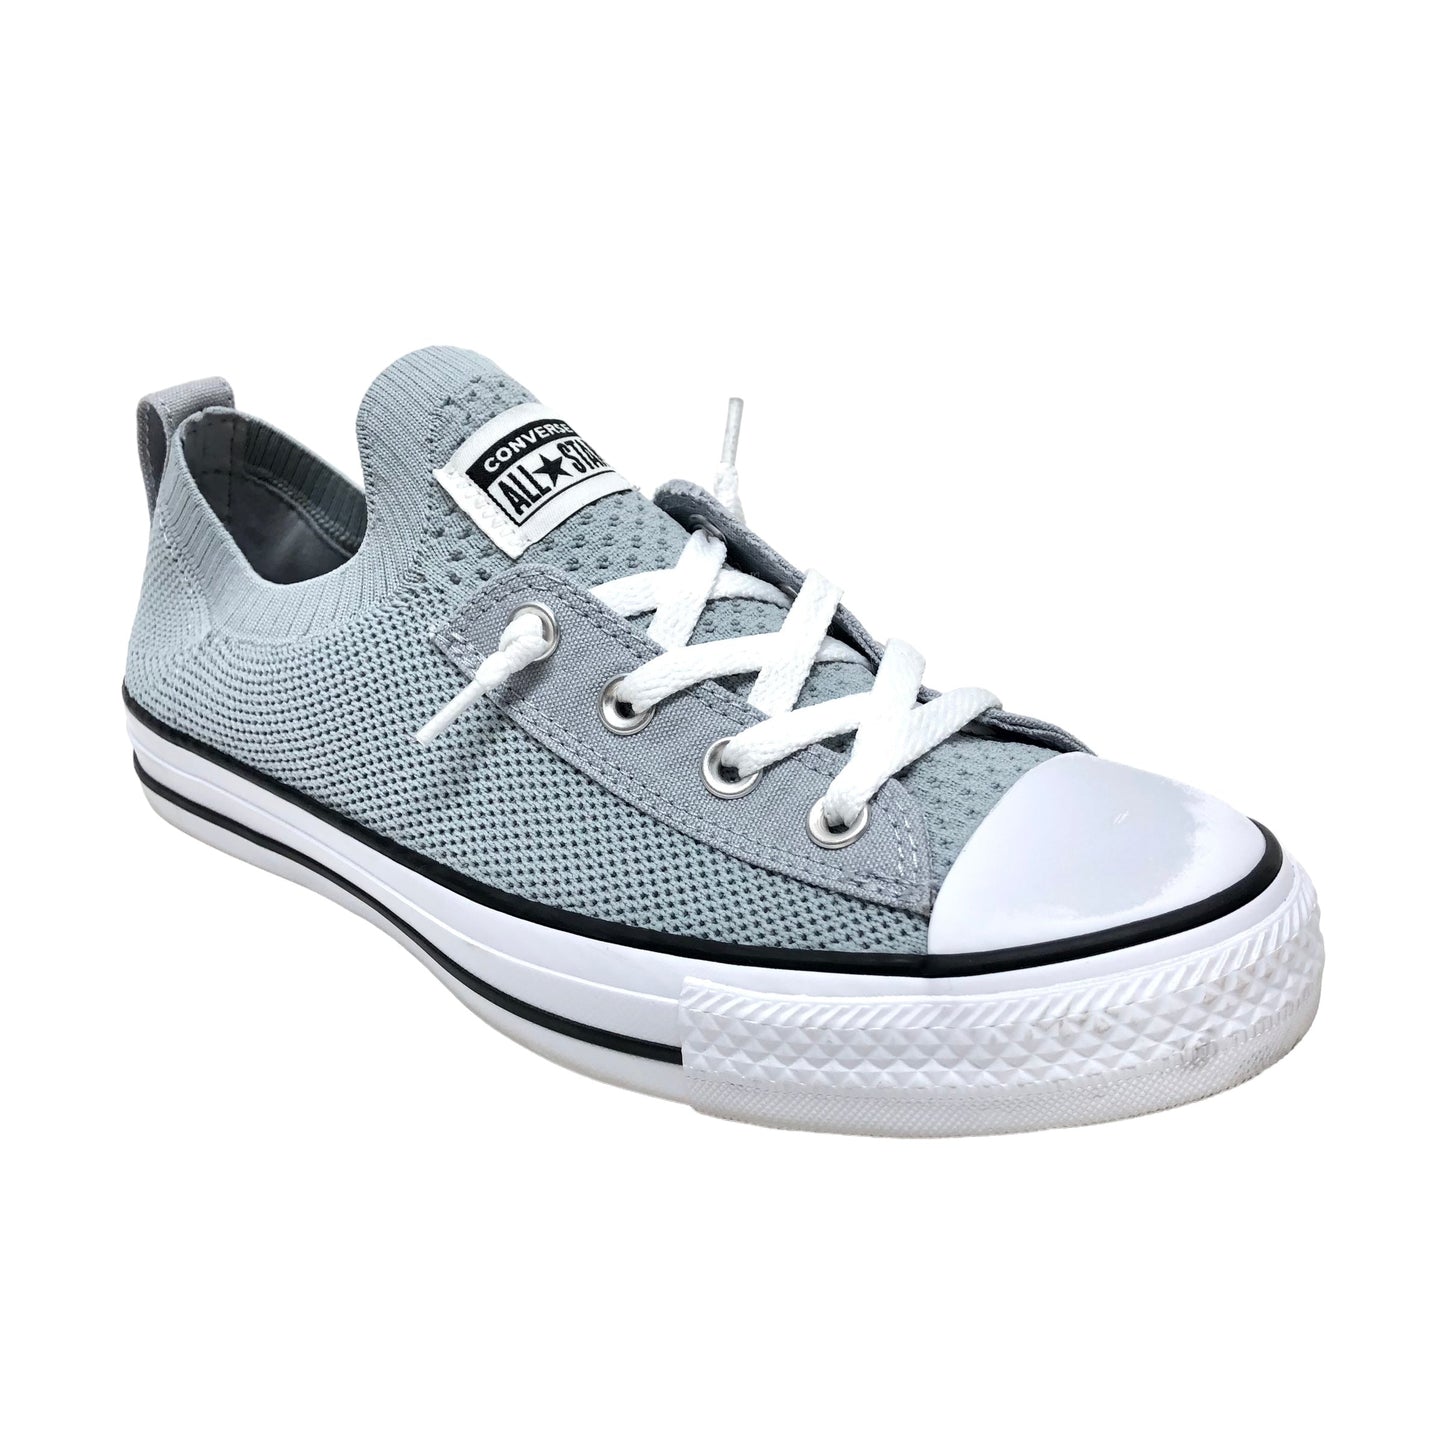 Shoes Sneakers By Converse  Size: 9.5